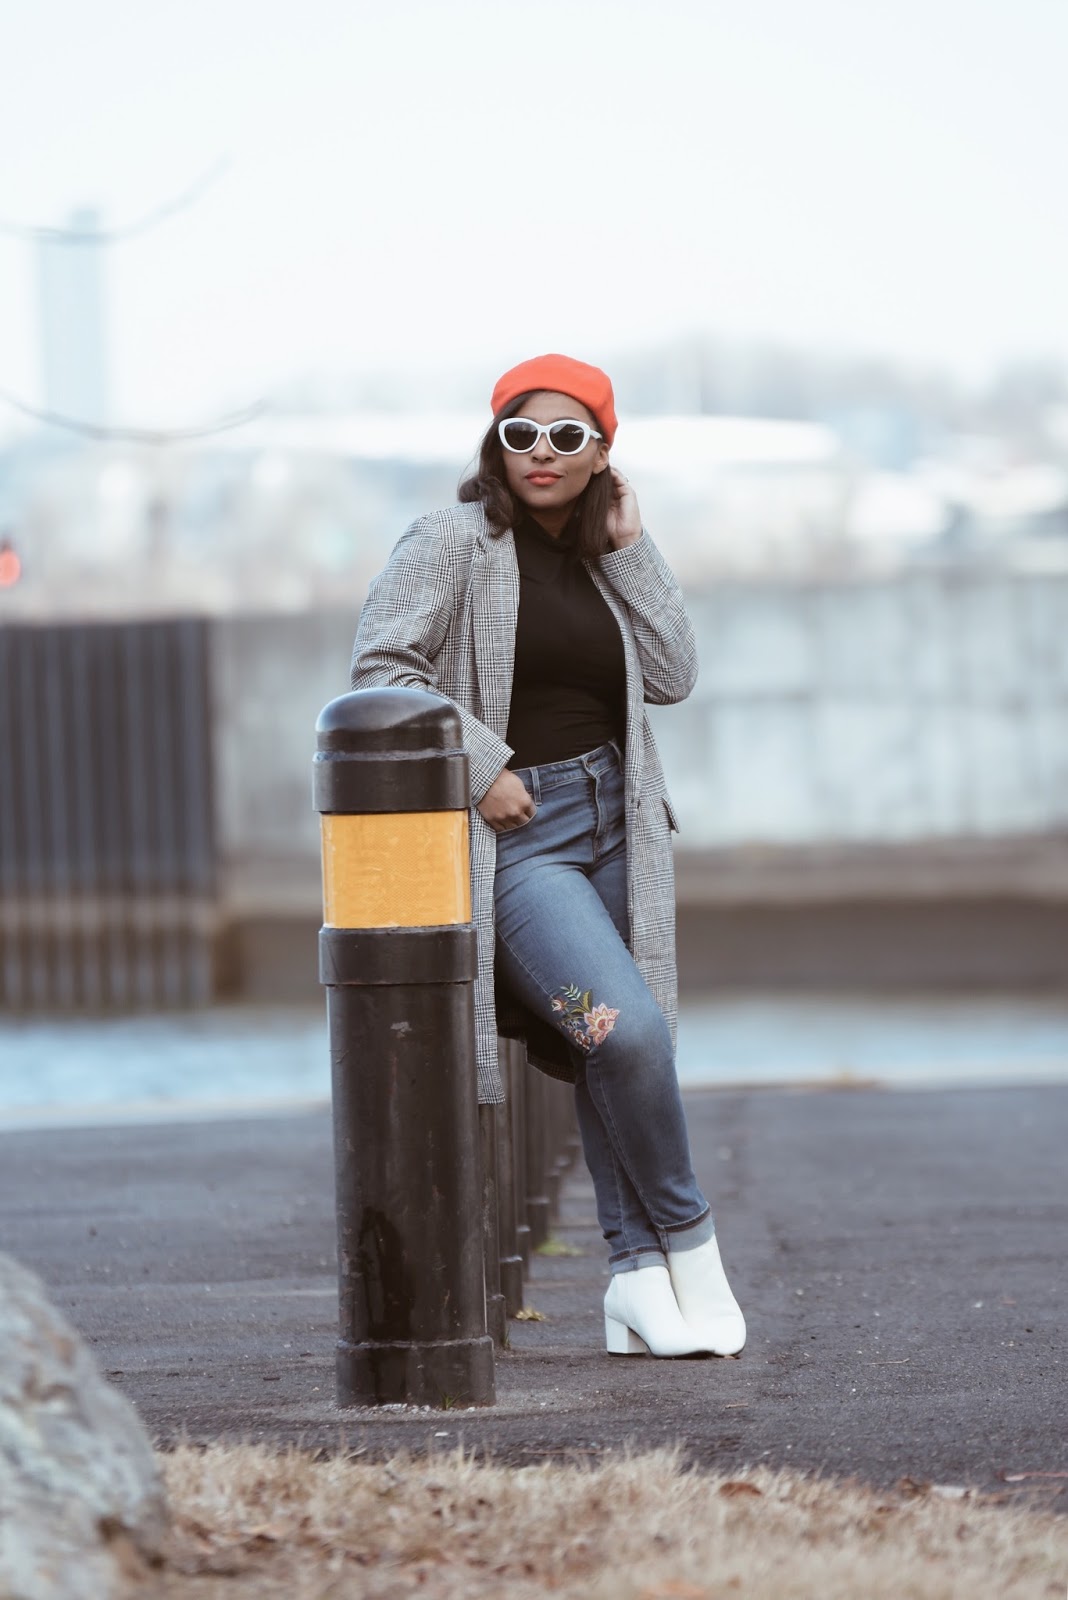 dominican blogger, oversized coat, beret, winter trends, latina bloggers, winter outfit ideas, winter trends, pea coat